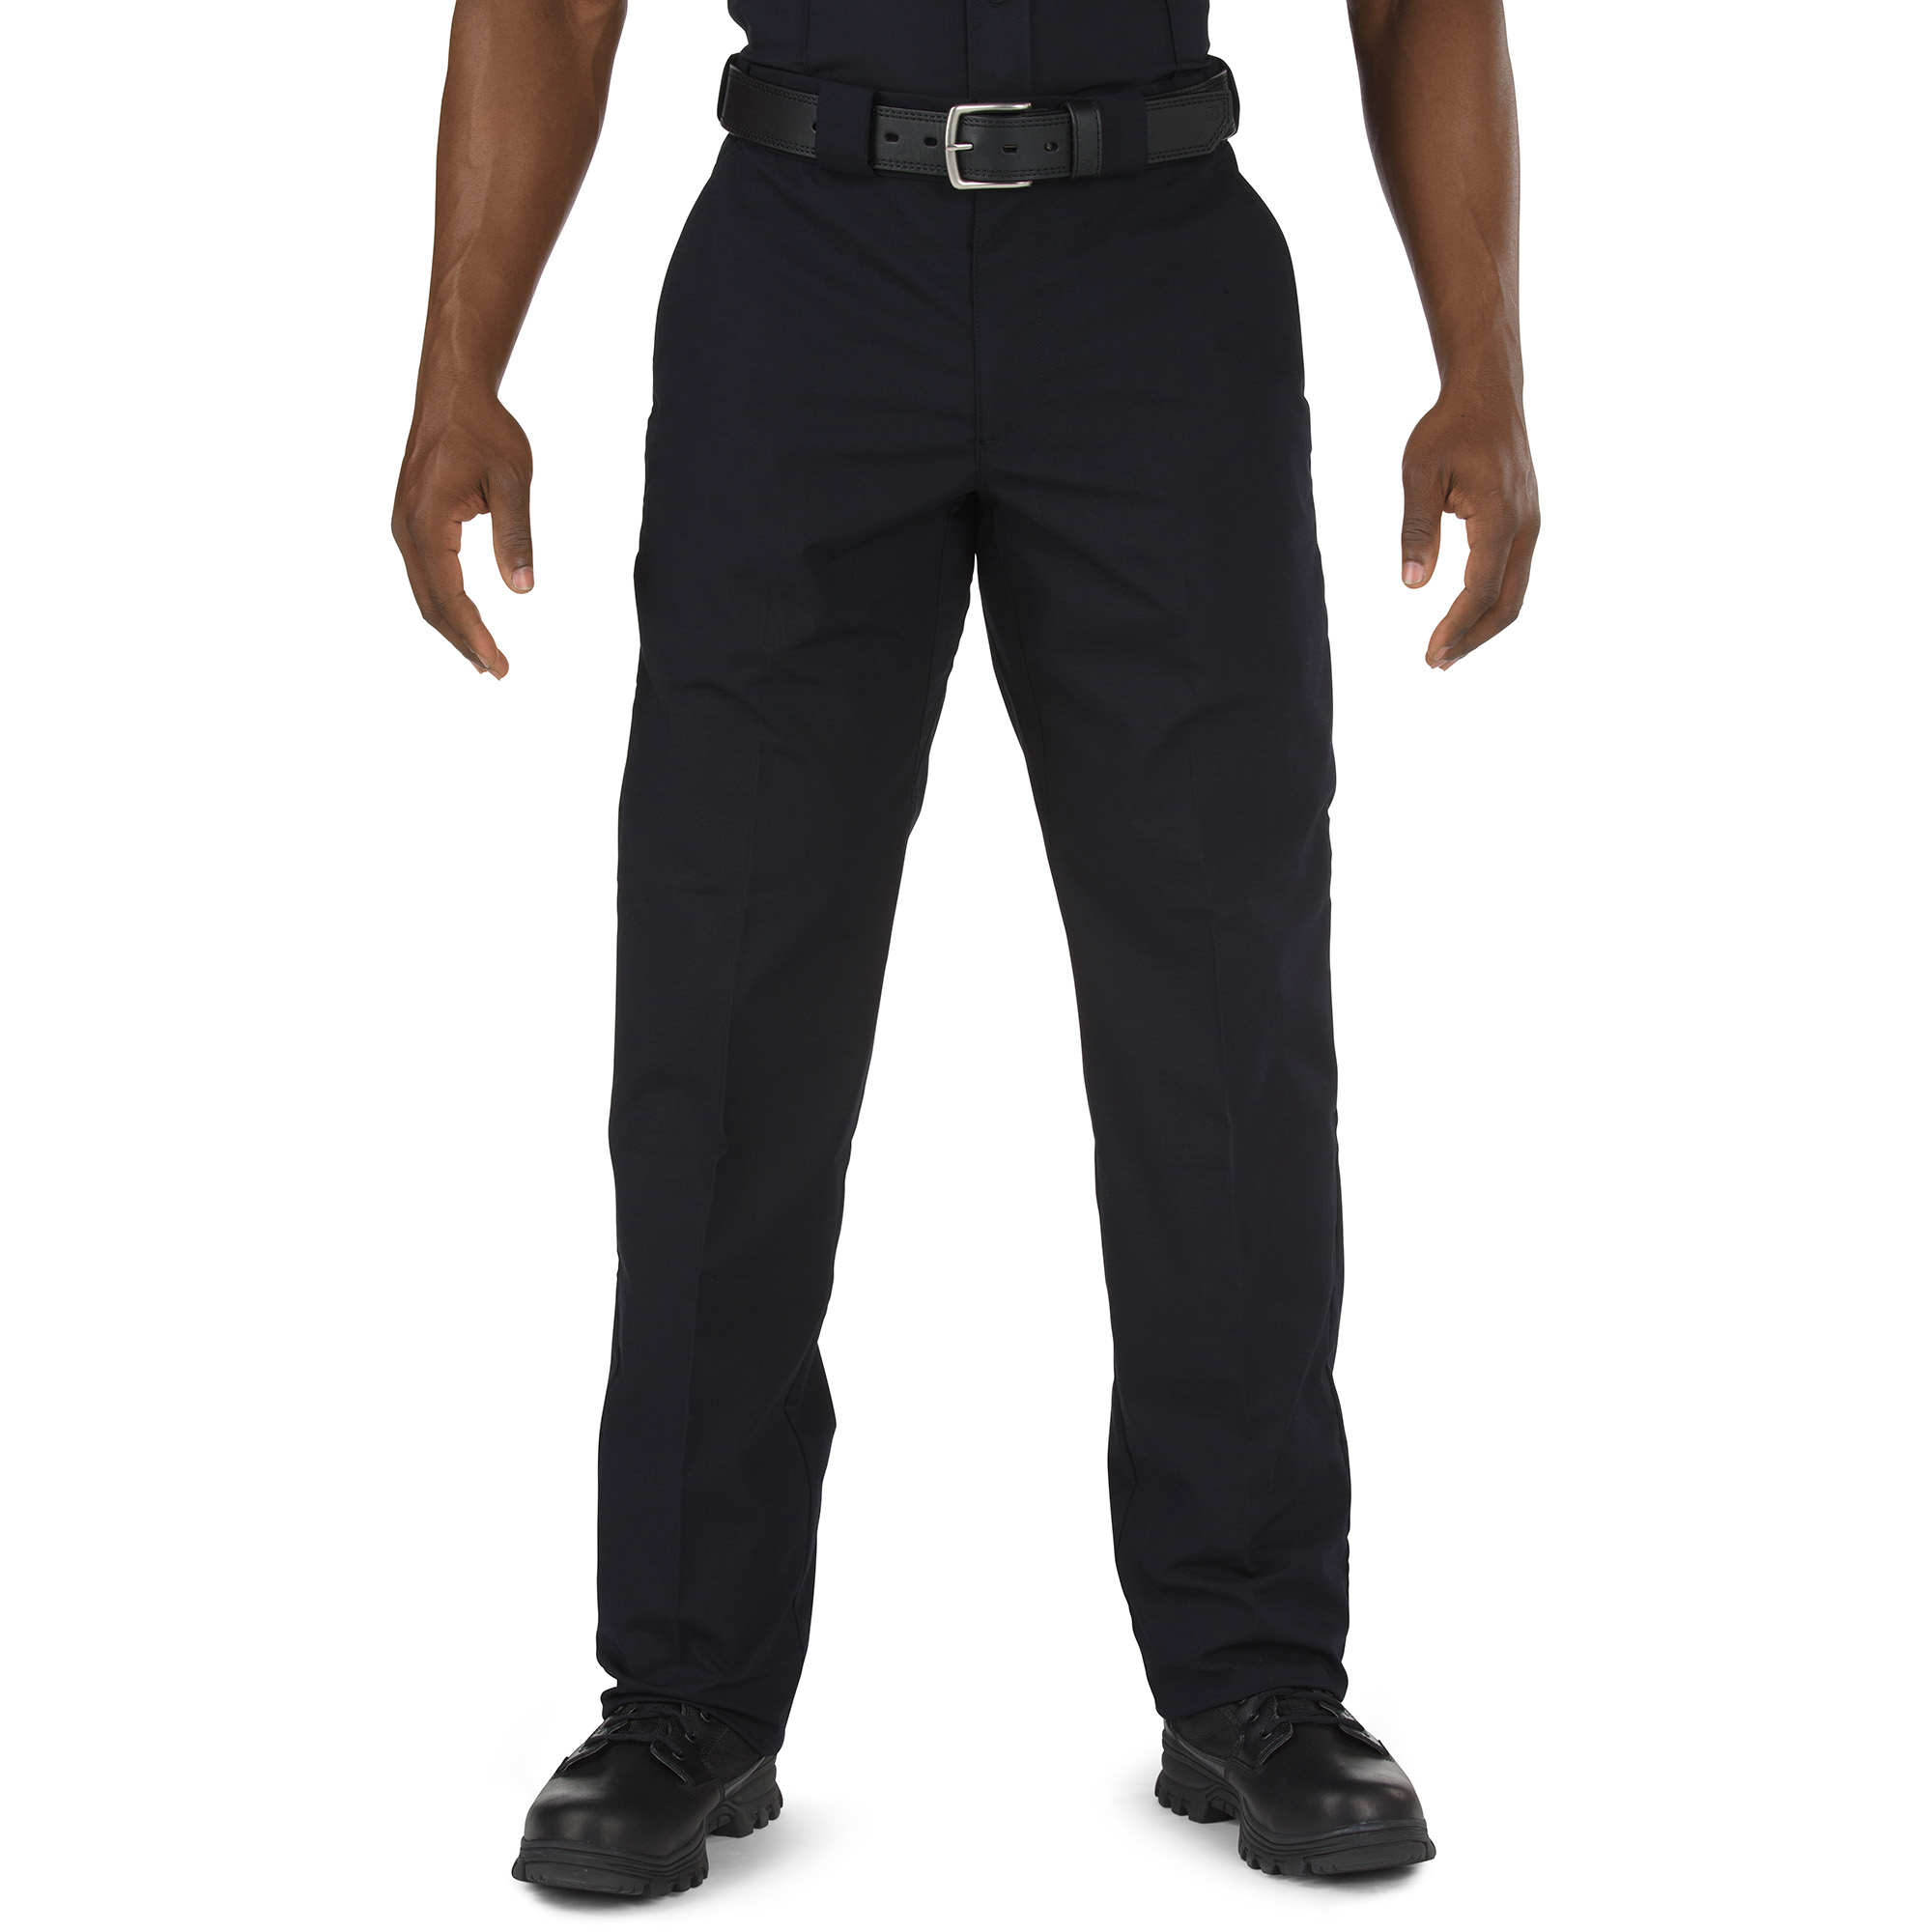 MenS 5.11 Strykeâ ¢ Class-A Pdu Pant From 5.11 Tactical-